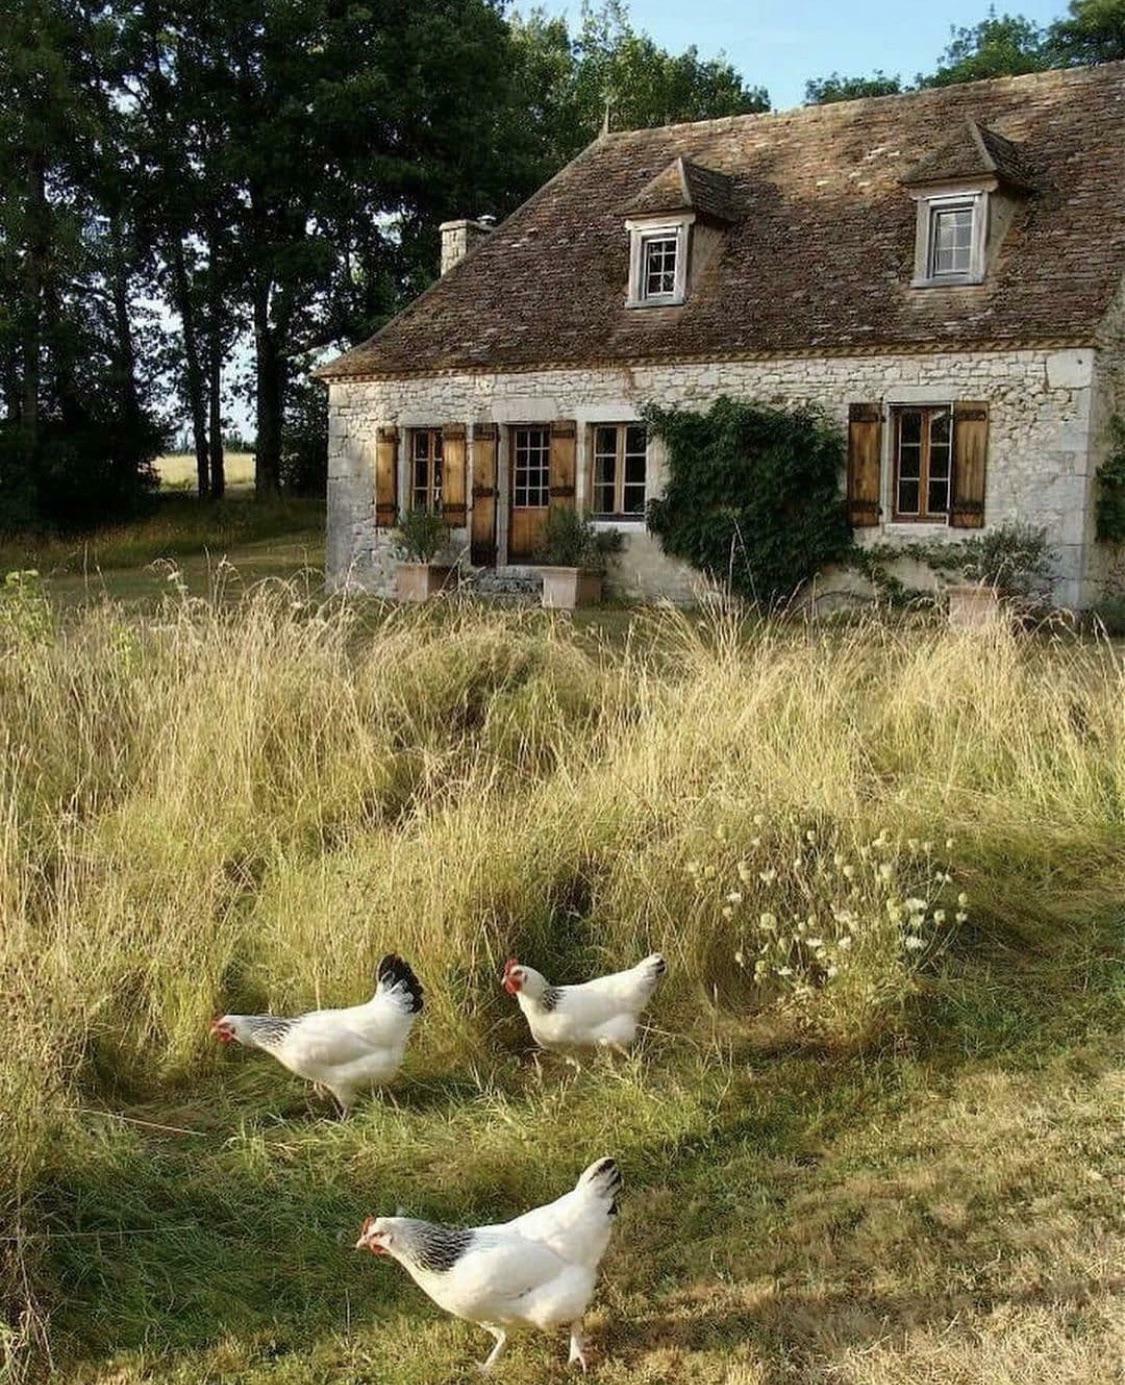 Imagine Feeding Your Little Chickens As You Enjoy Your Morning Coffee